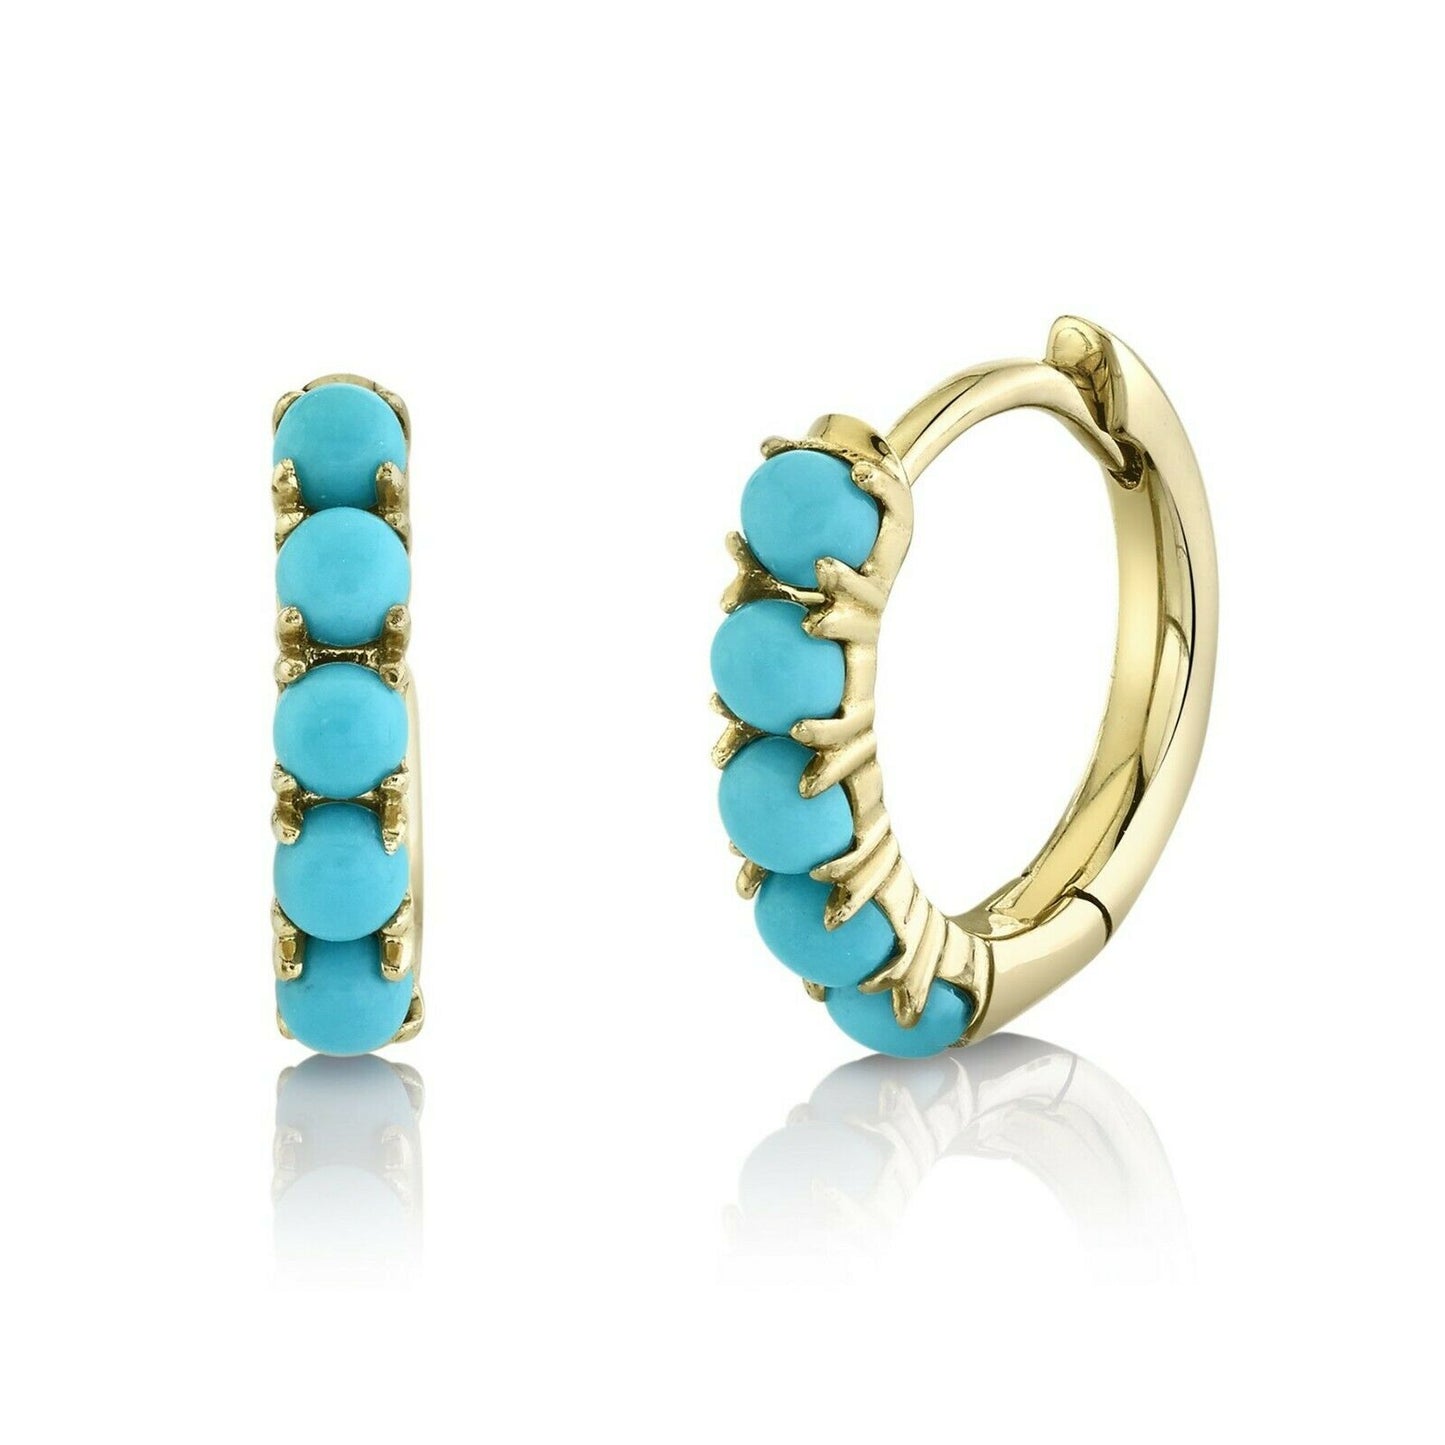 14K Gold 0.43CT Turquoise Huggie Earrings Round Cabochon 0.40" Hoops